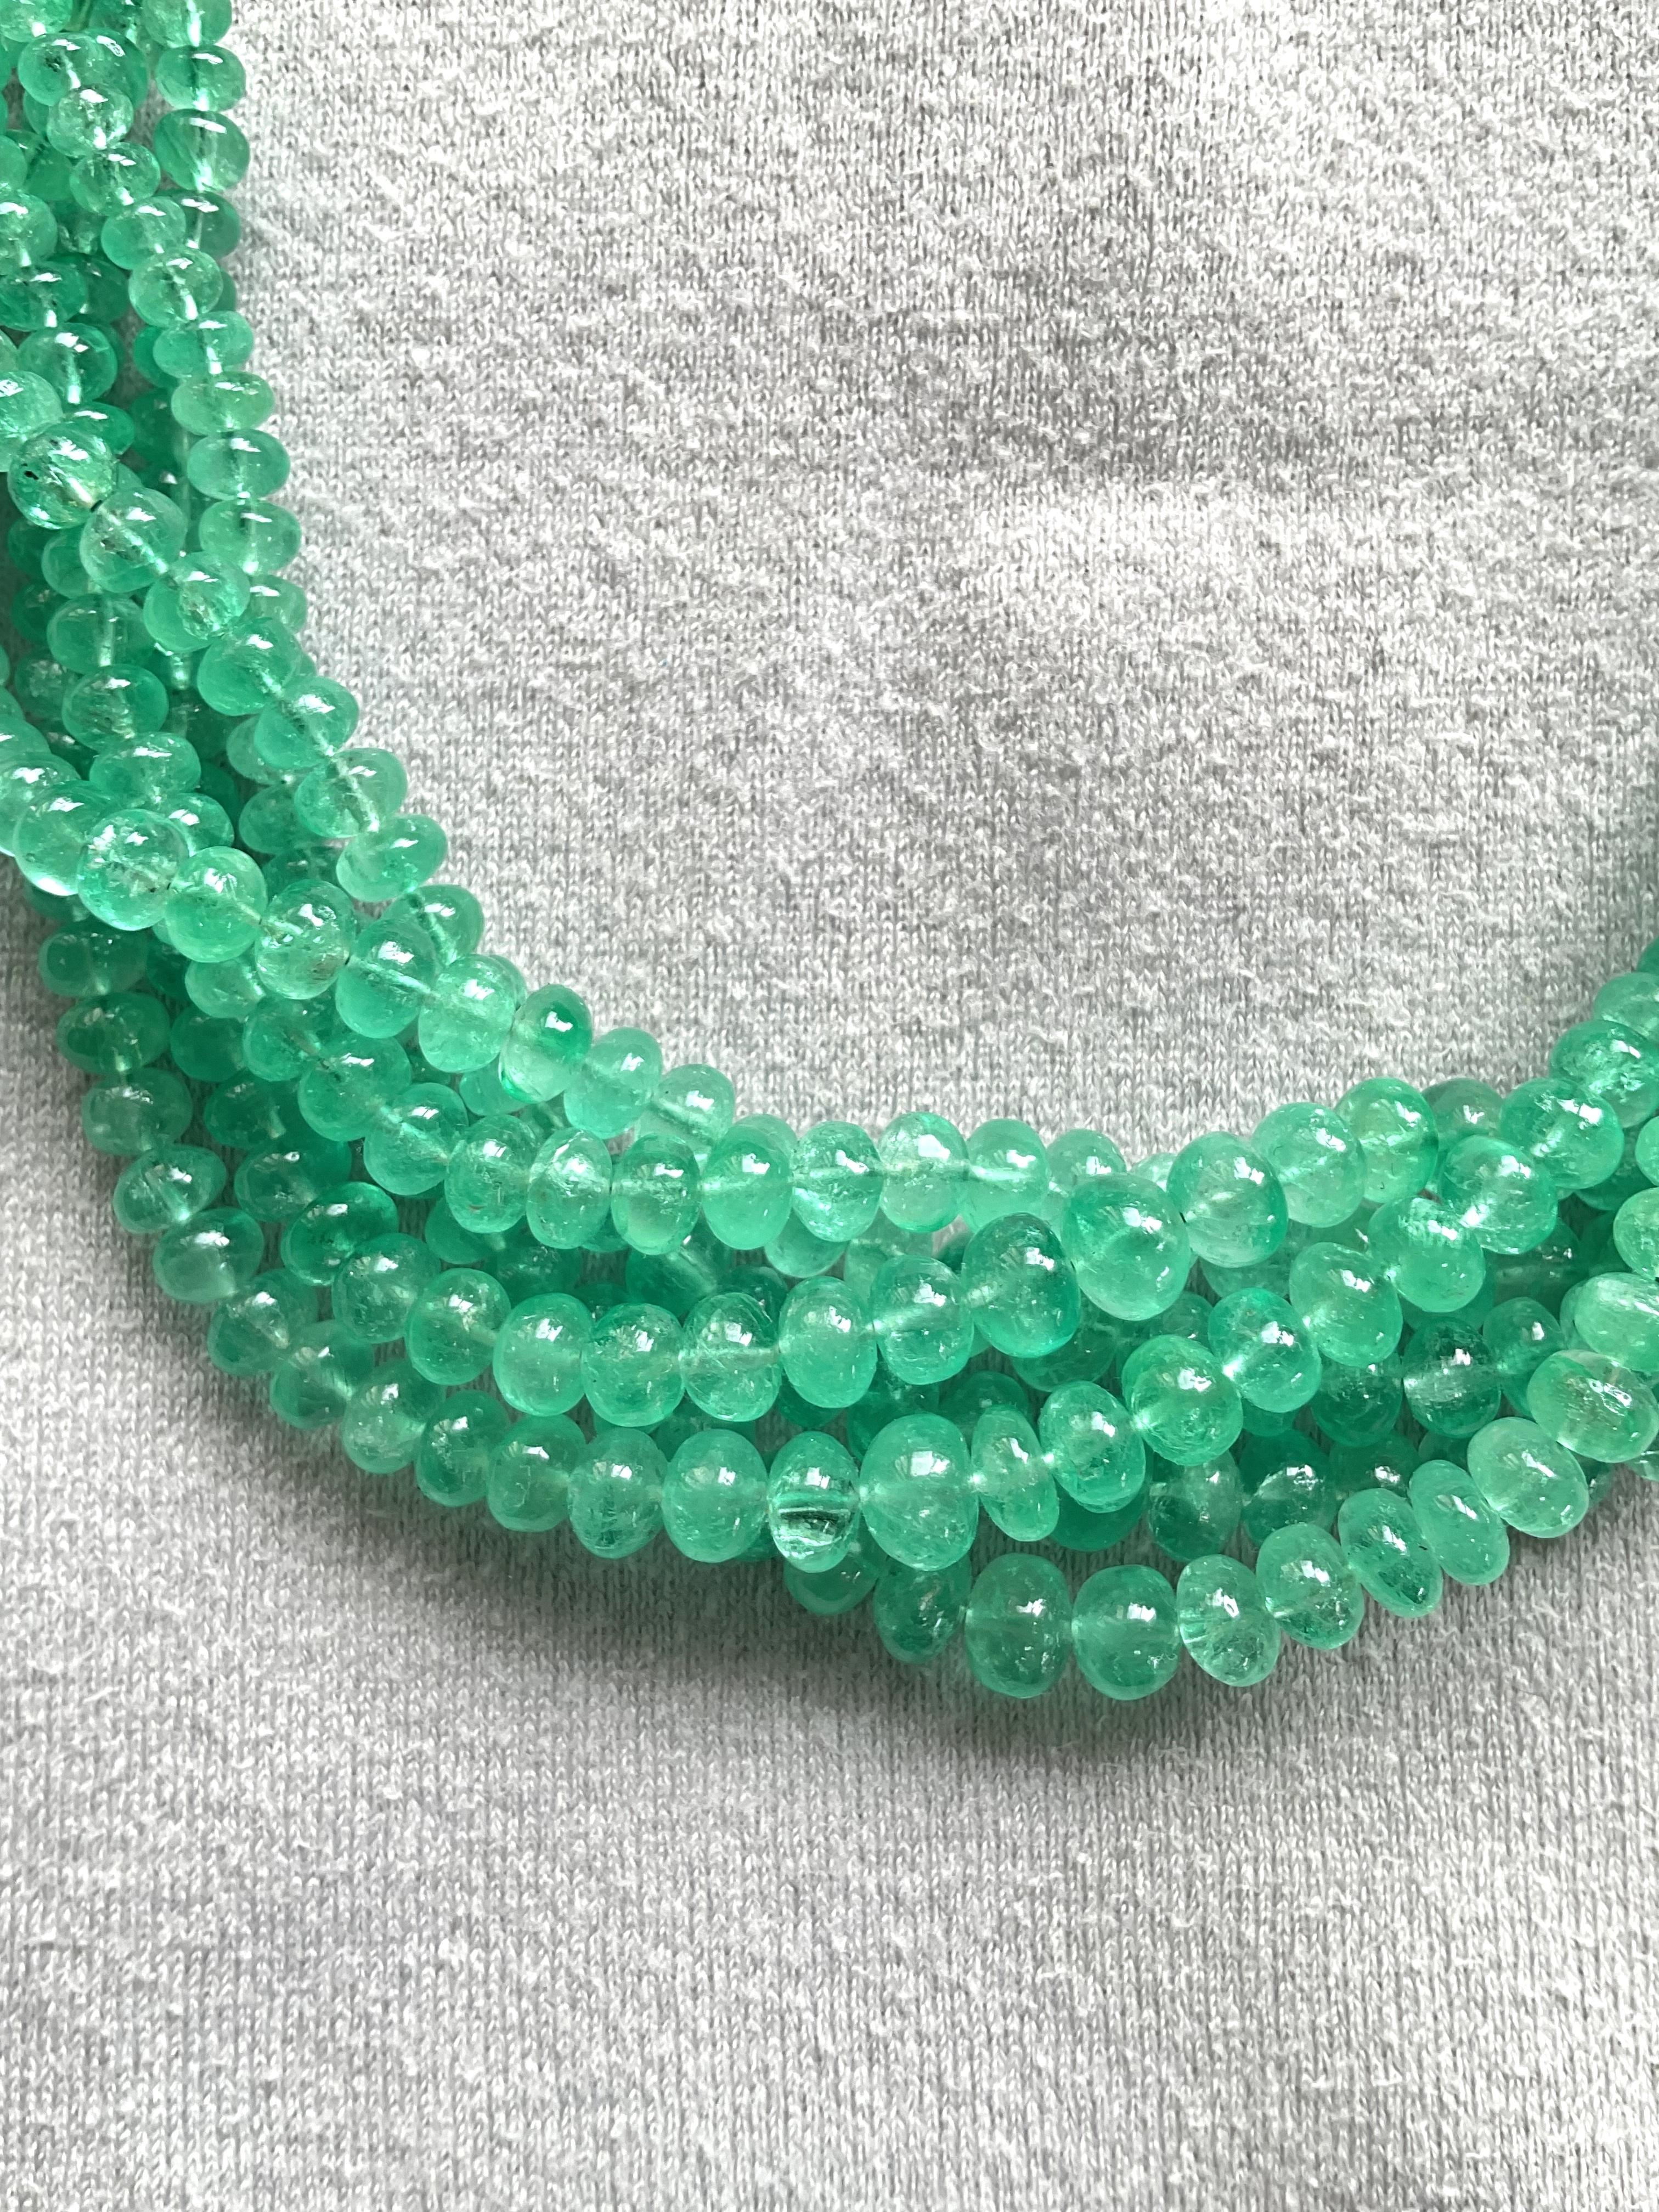 Top Quality 218.70 Carats Colombian Emerald Beads For high Jewelry Natural Gems For Sale 2